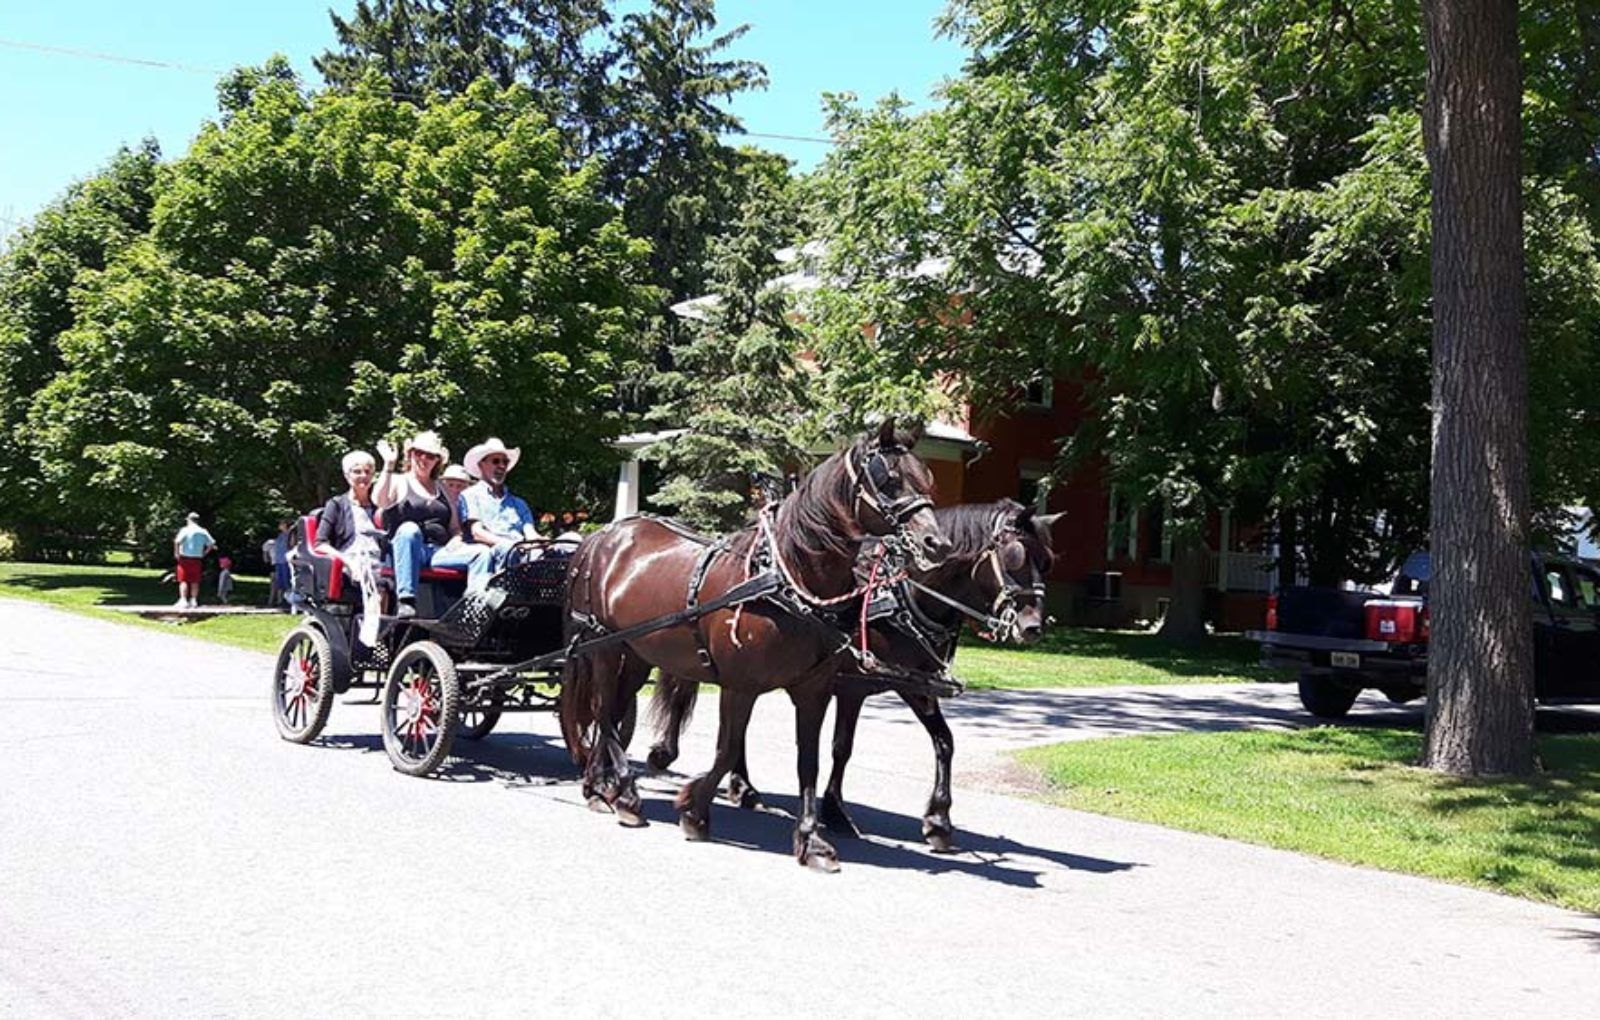 LS_July 10 2019 Horse and Buggy Parade (71)